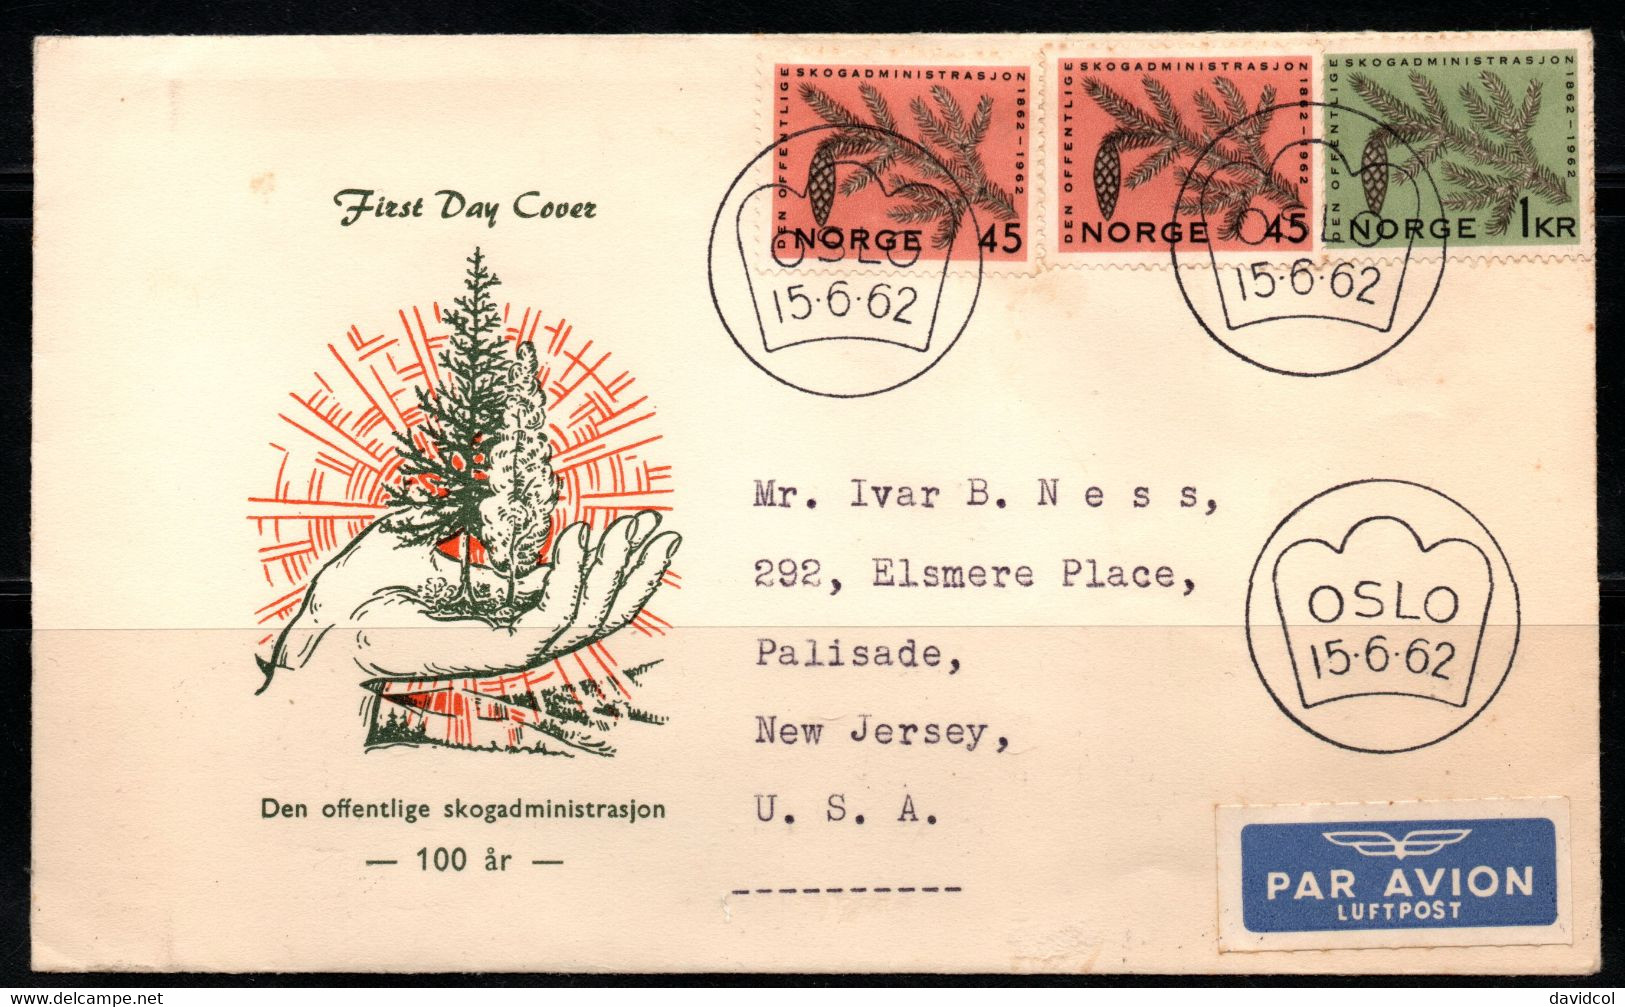 CA169- COVERAUCTION!!! - NORWAY 1962 - OSLO 1-6-62- FIR BRANCH AND CONE - Lettres & Documents